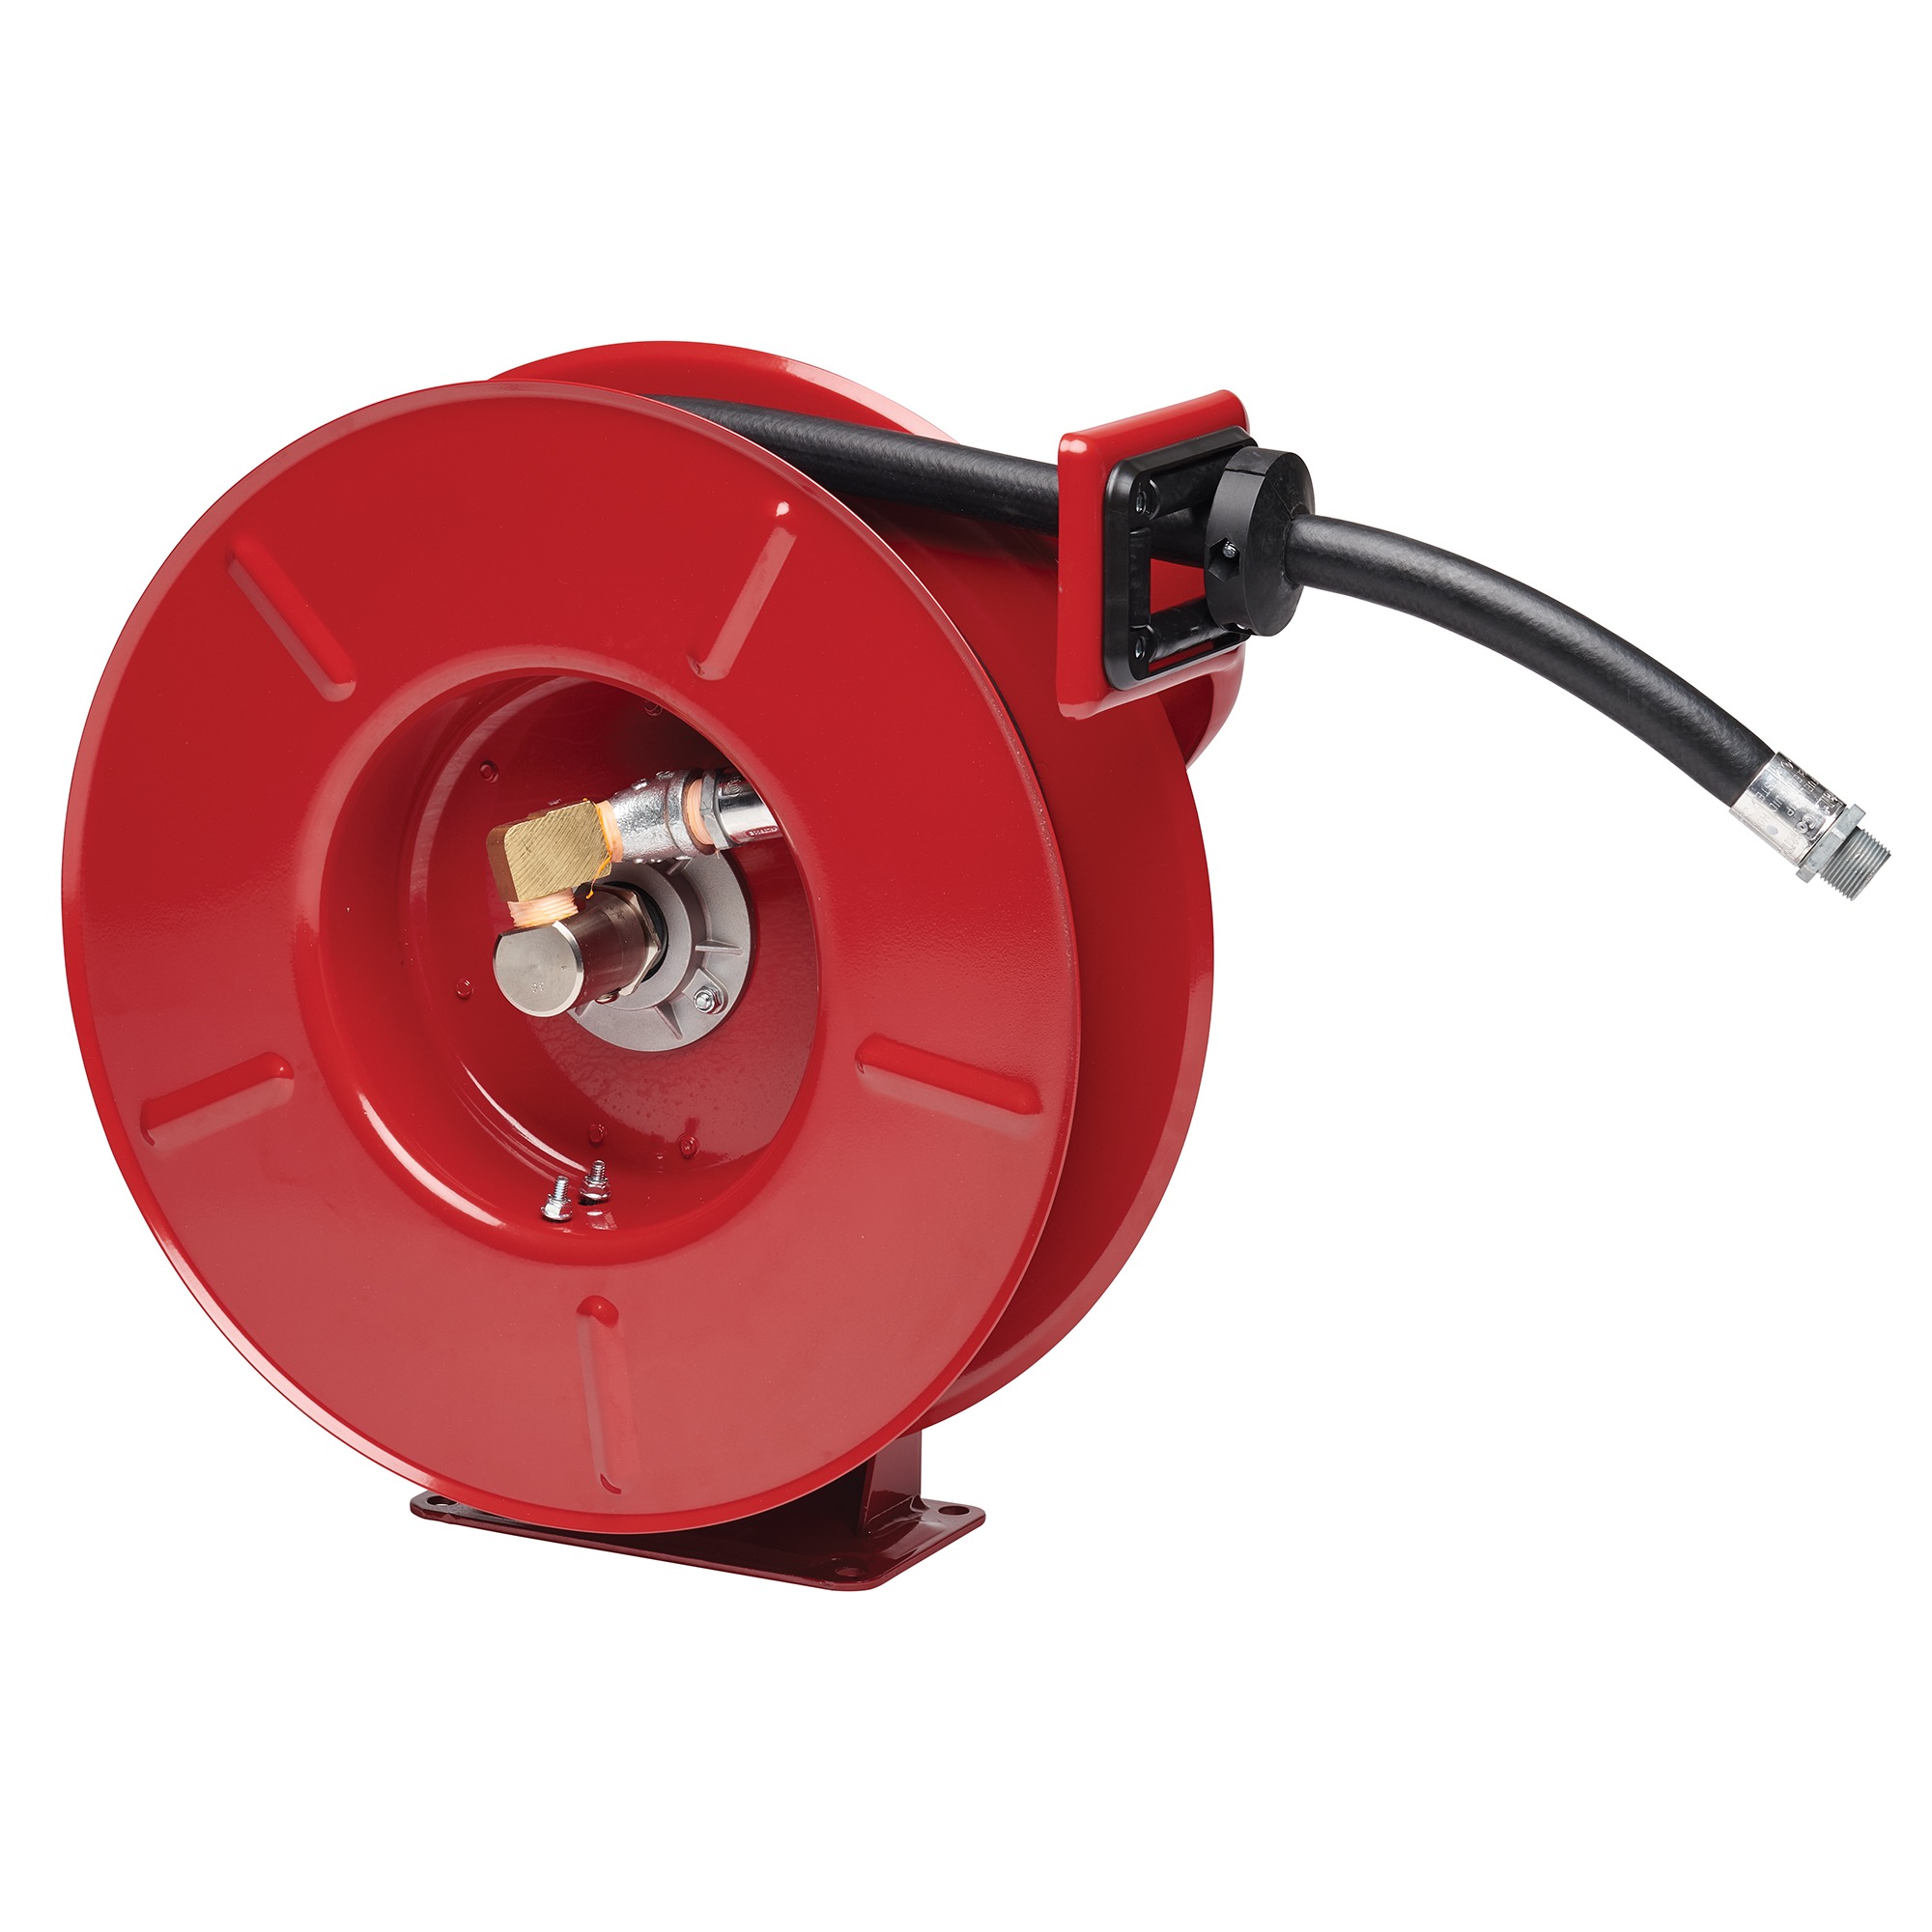 Spring Driven Steel Construction Heavy Duty Retractable Rotary Hose Reel  Lpcb Approved Swing Maunal Hose Reel - China Hose Reel, Tube Winder